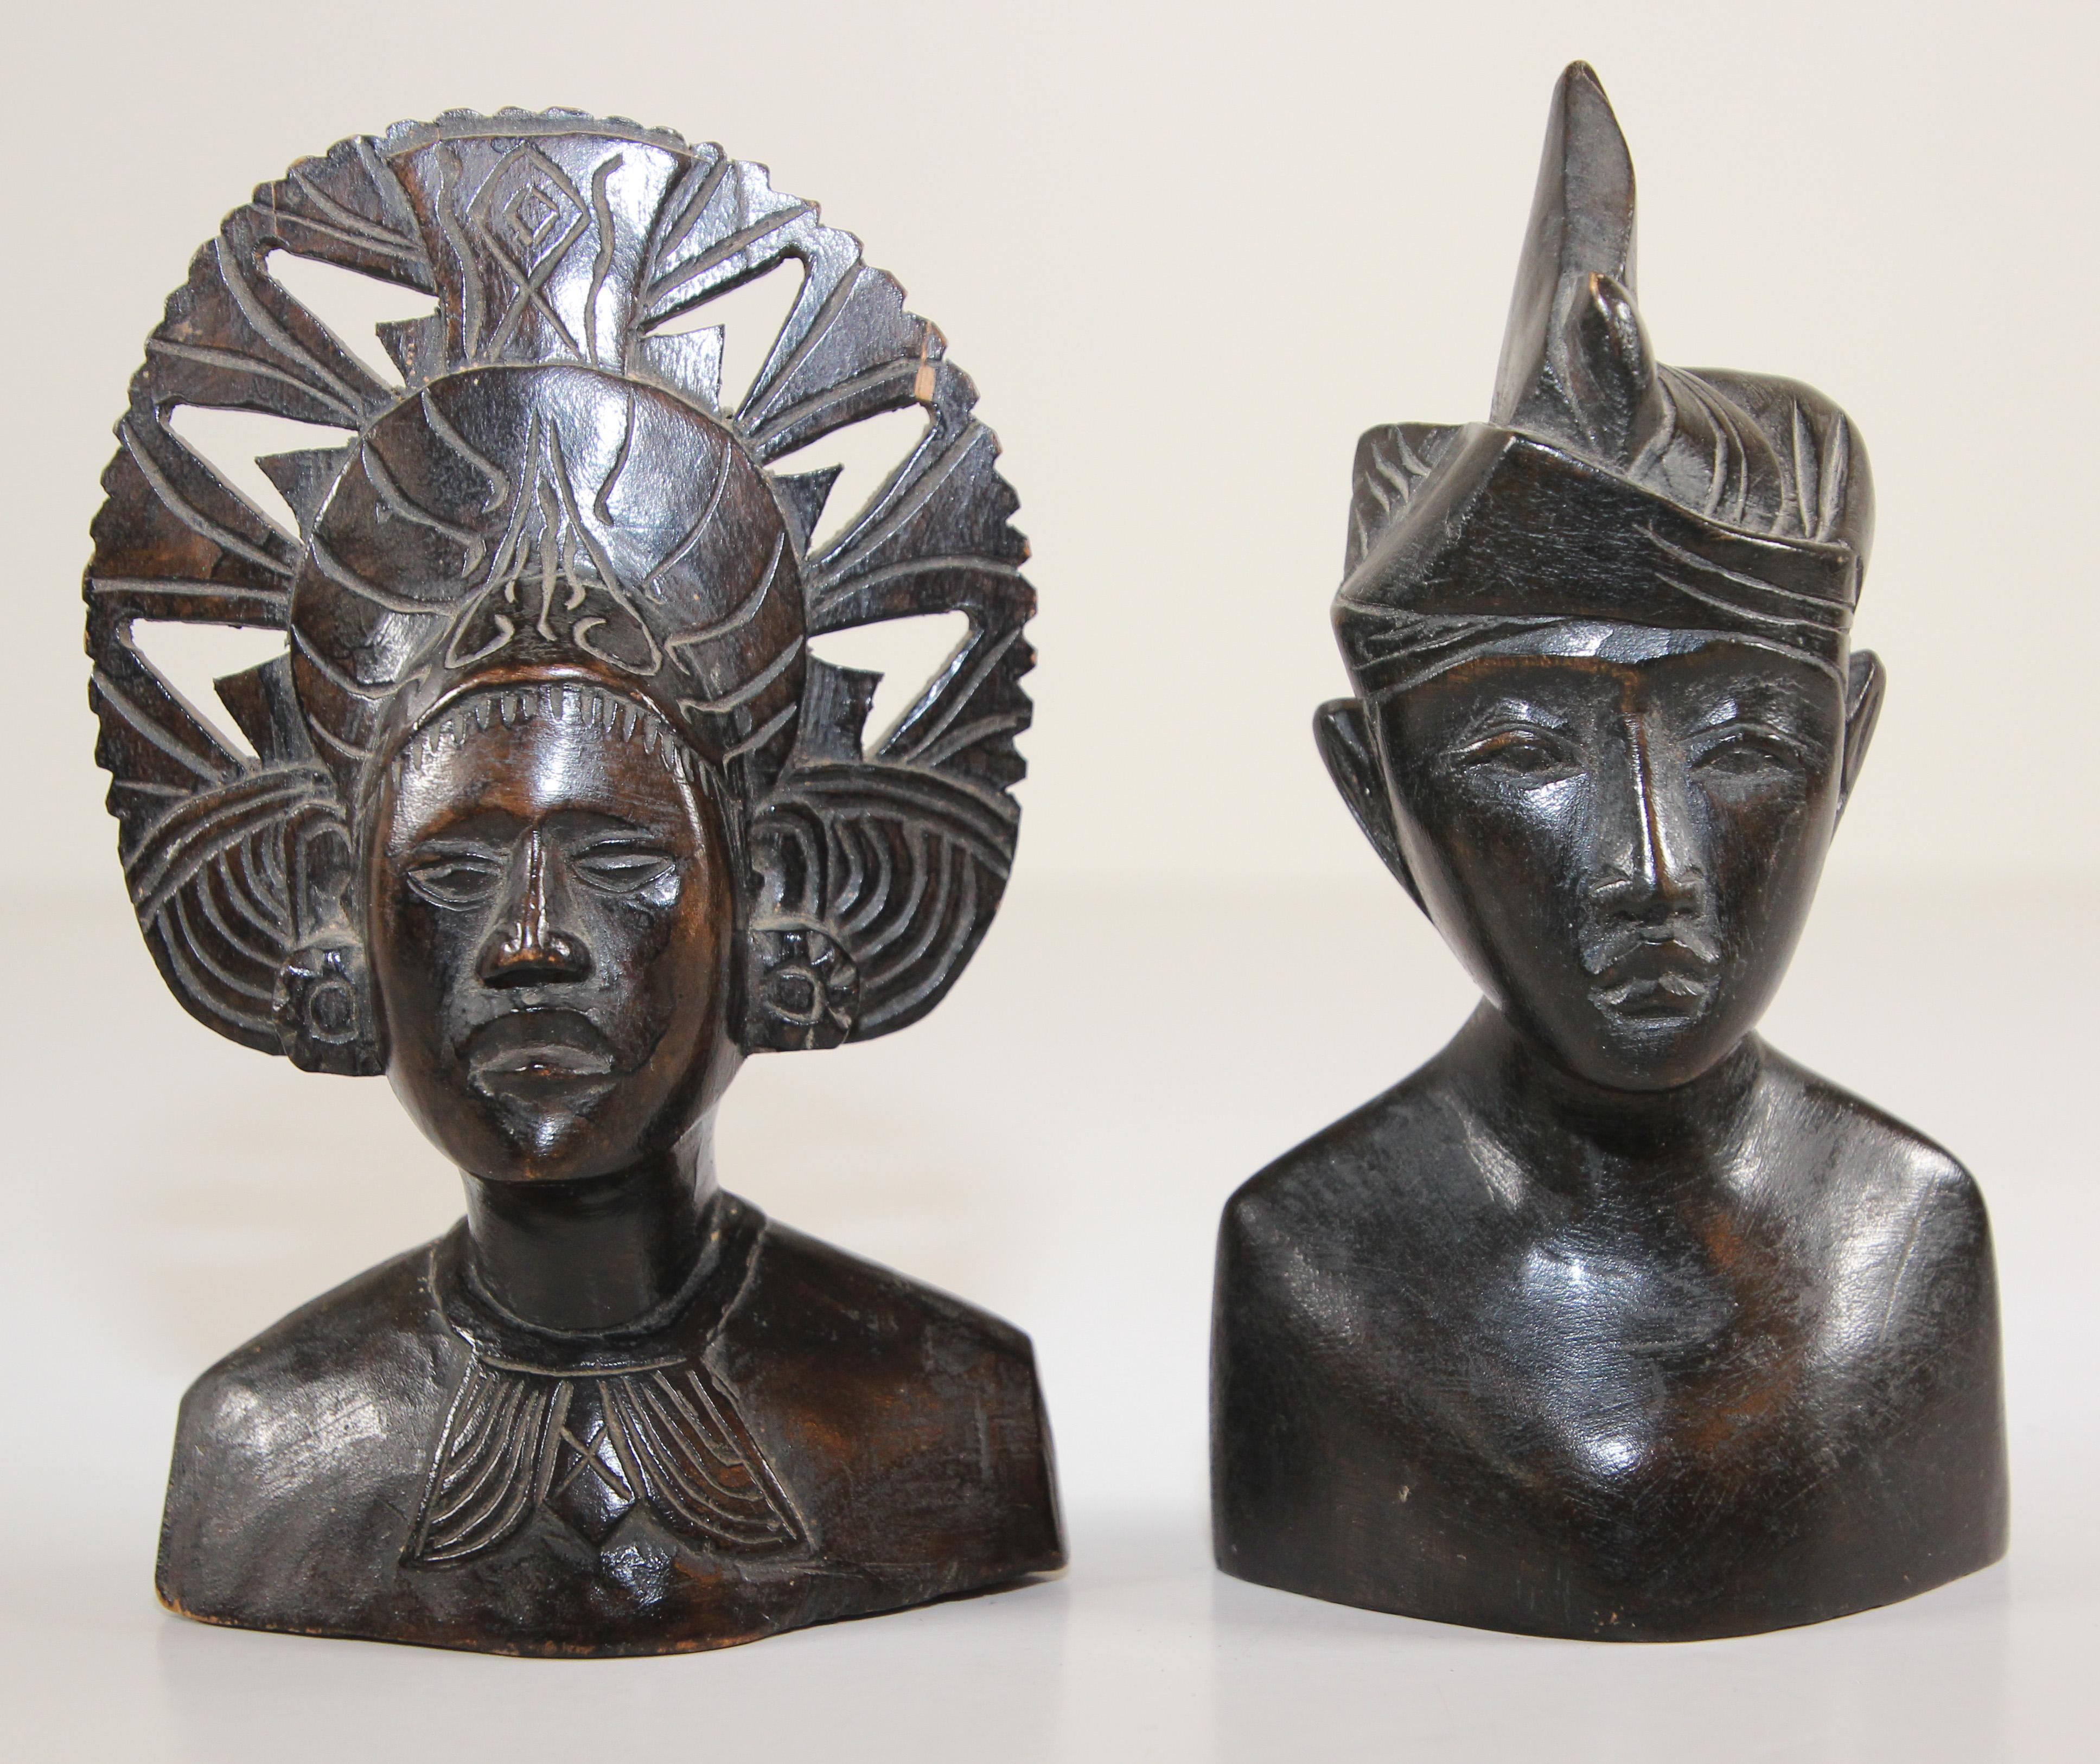 Vintage midcentury hand carved ebony wooden Balinese busts sculptures.
Hand carved sculpture in wood depicting a Balinese couple.
Bust of a man and women in Art Deco style sculpture wearing traditional ceremonial head dress, great